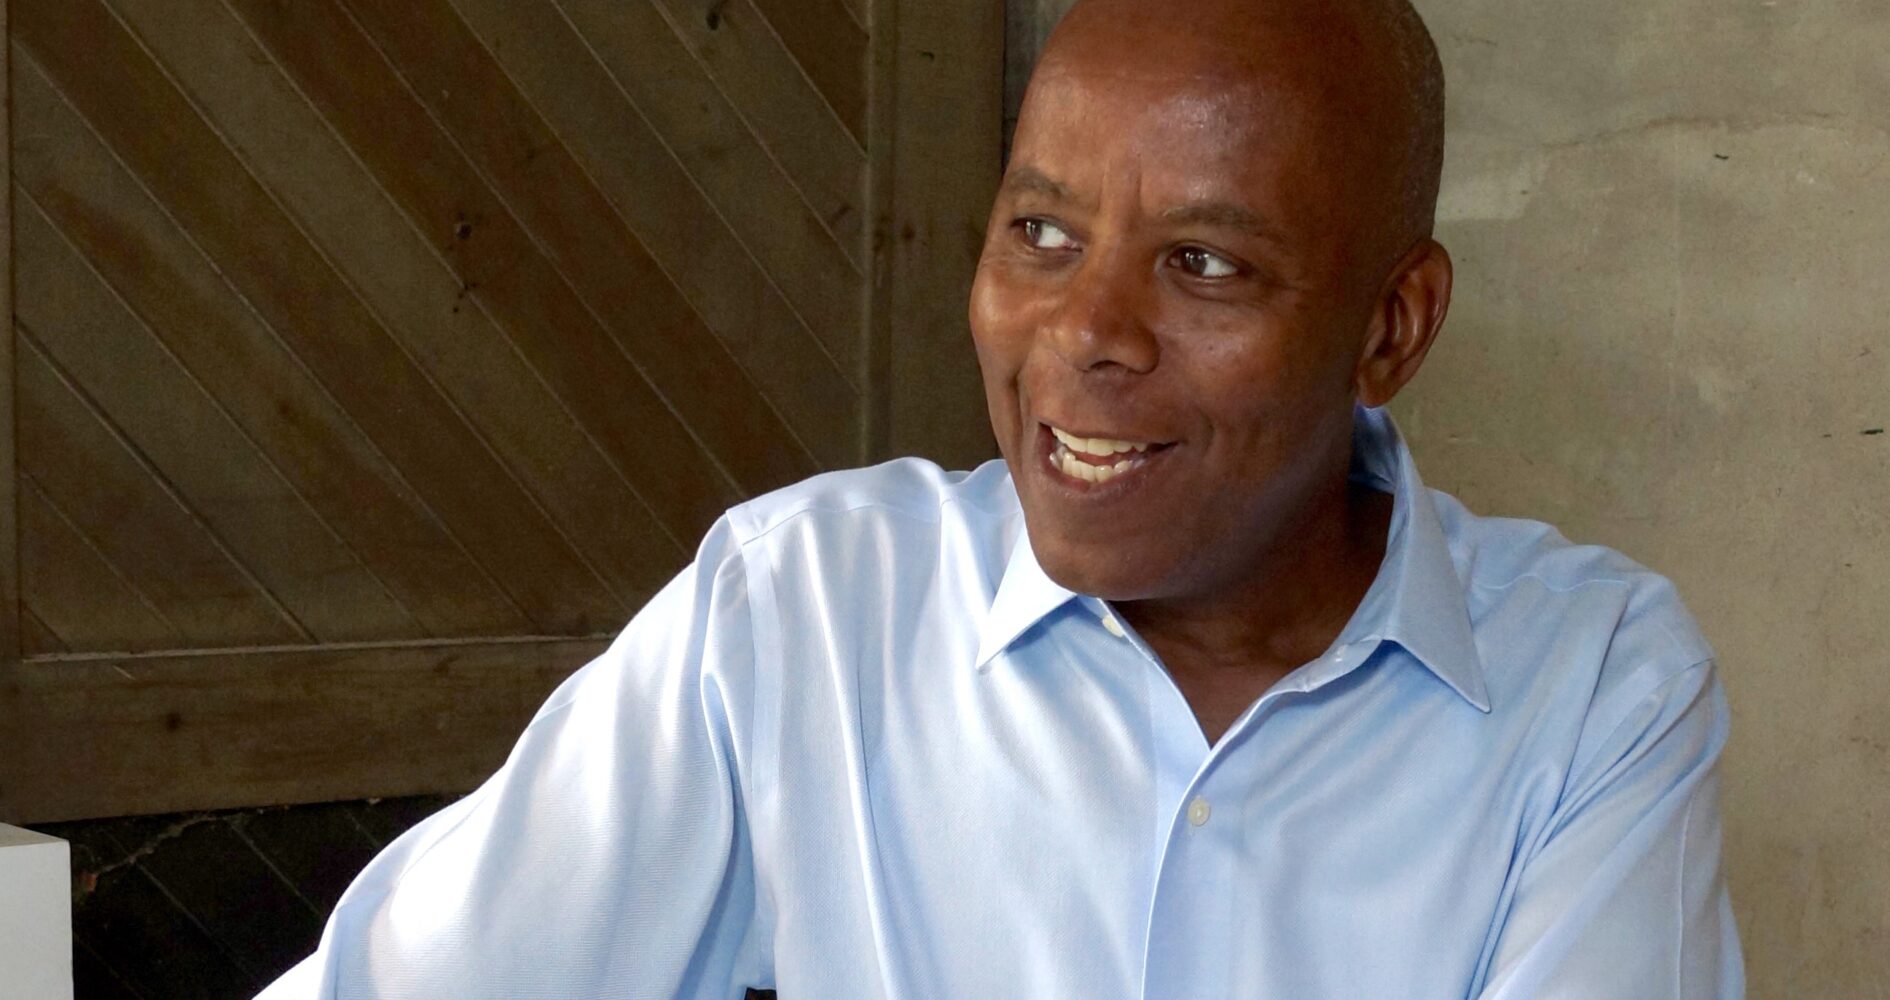 Photograph of artist Richard Haynes, a smiling Black man in a light blue collared shirt in front of a beige wall.